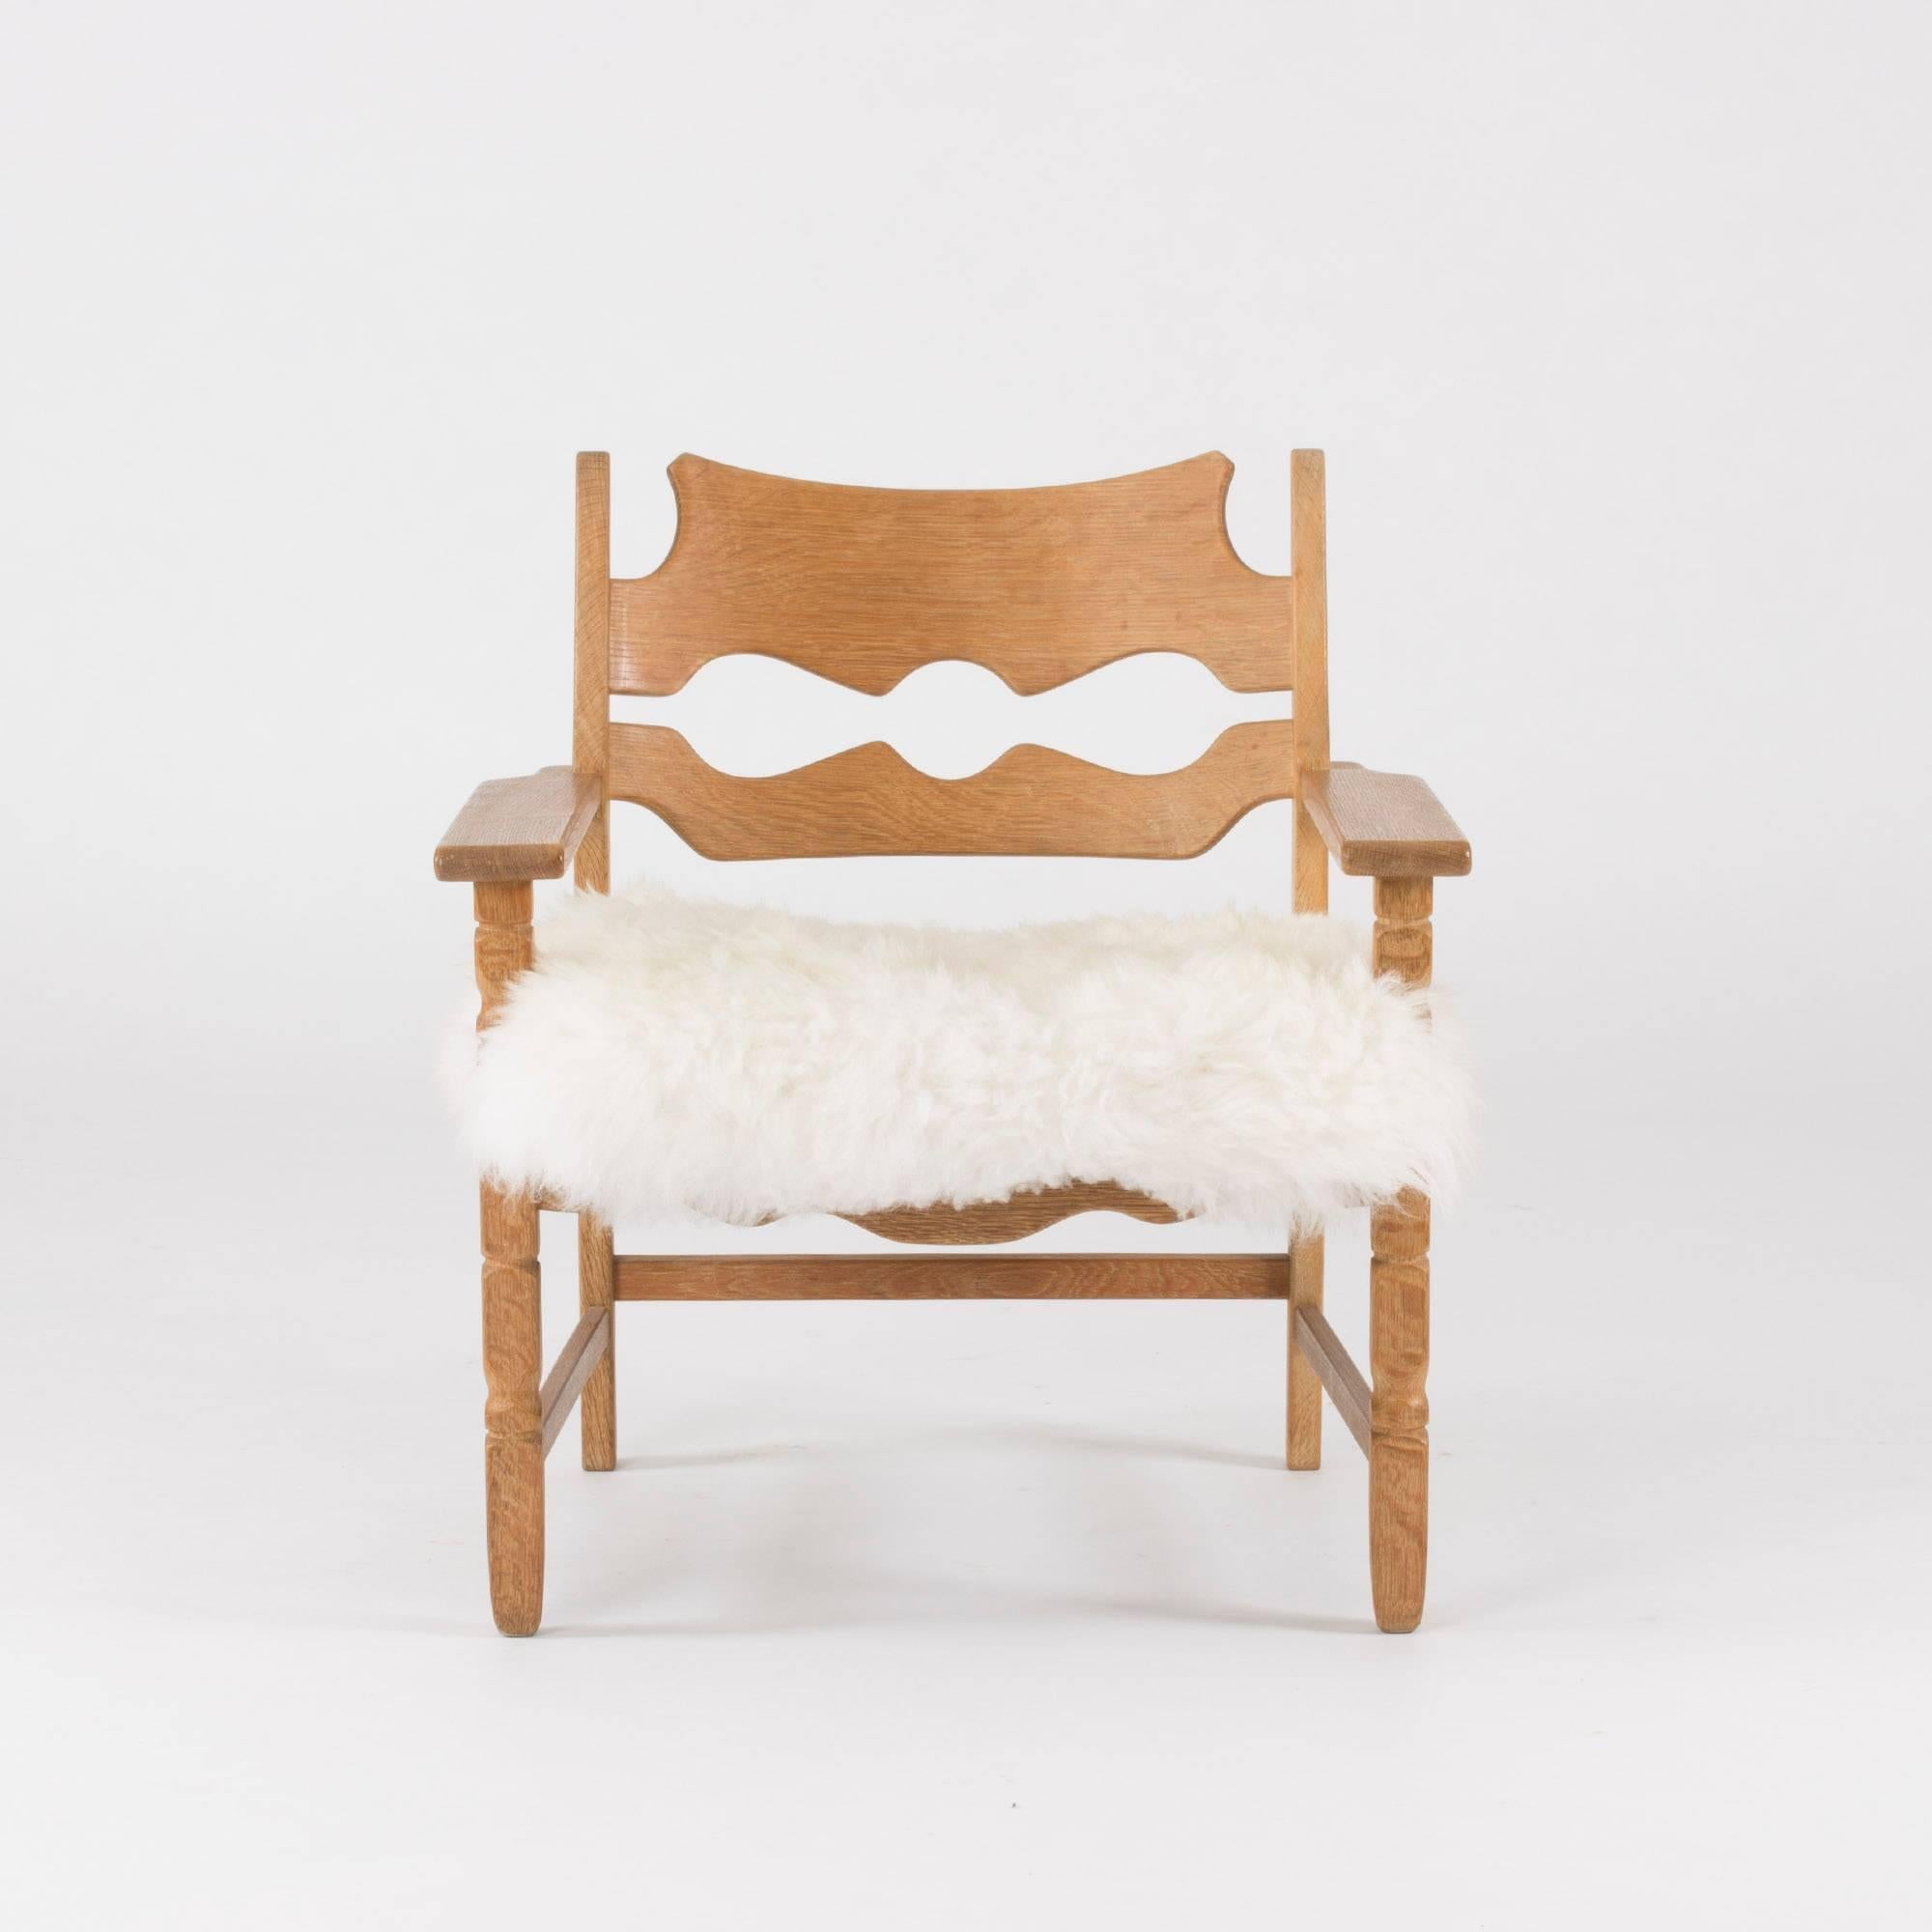 Very cool “Razor Back” lounge chair by Henning Kjaernulf, in a rustic meets modernism design. Made of oak with beautiful wood grain, upholstered with sheepskin.